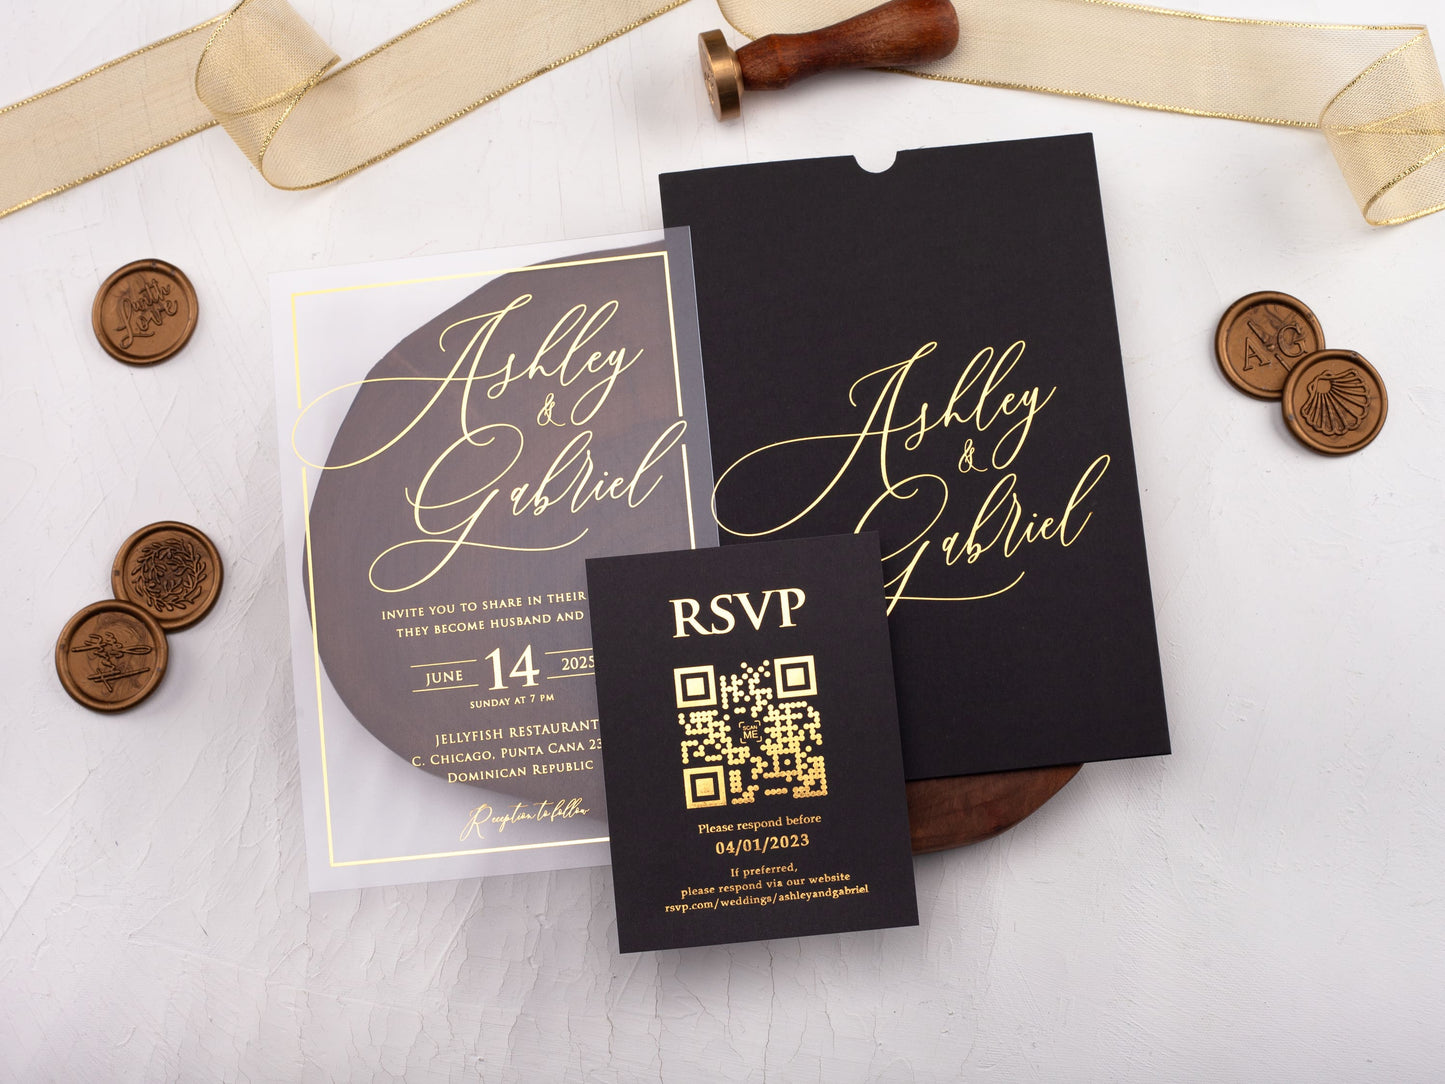 Gold Foil Printed Acrylic Invitation with Black Sleeve Envelope